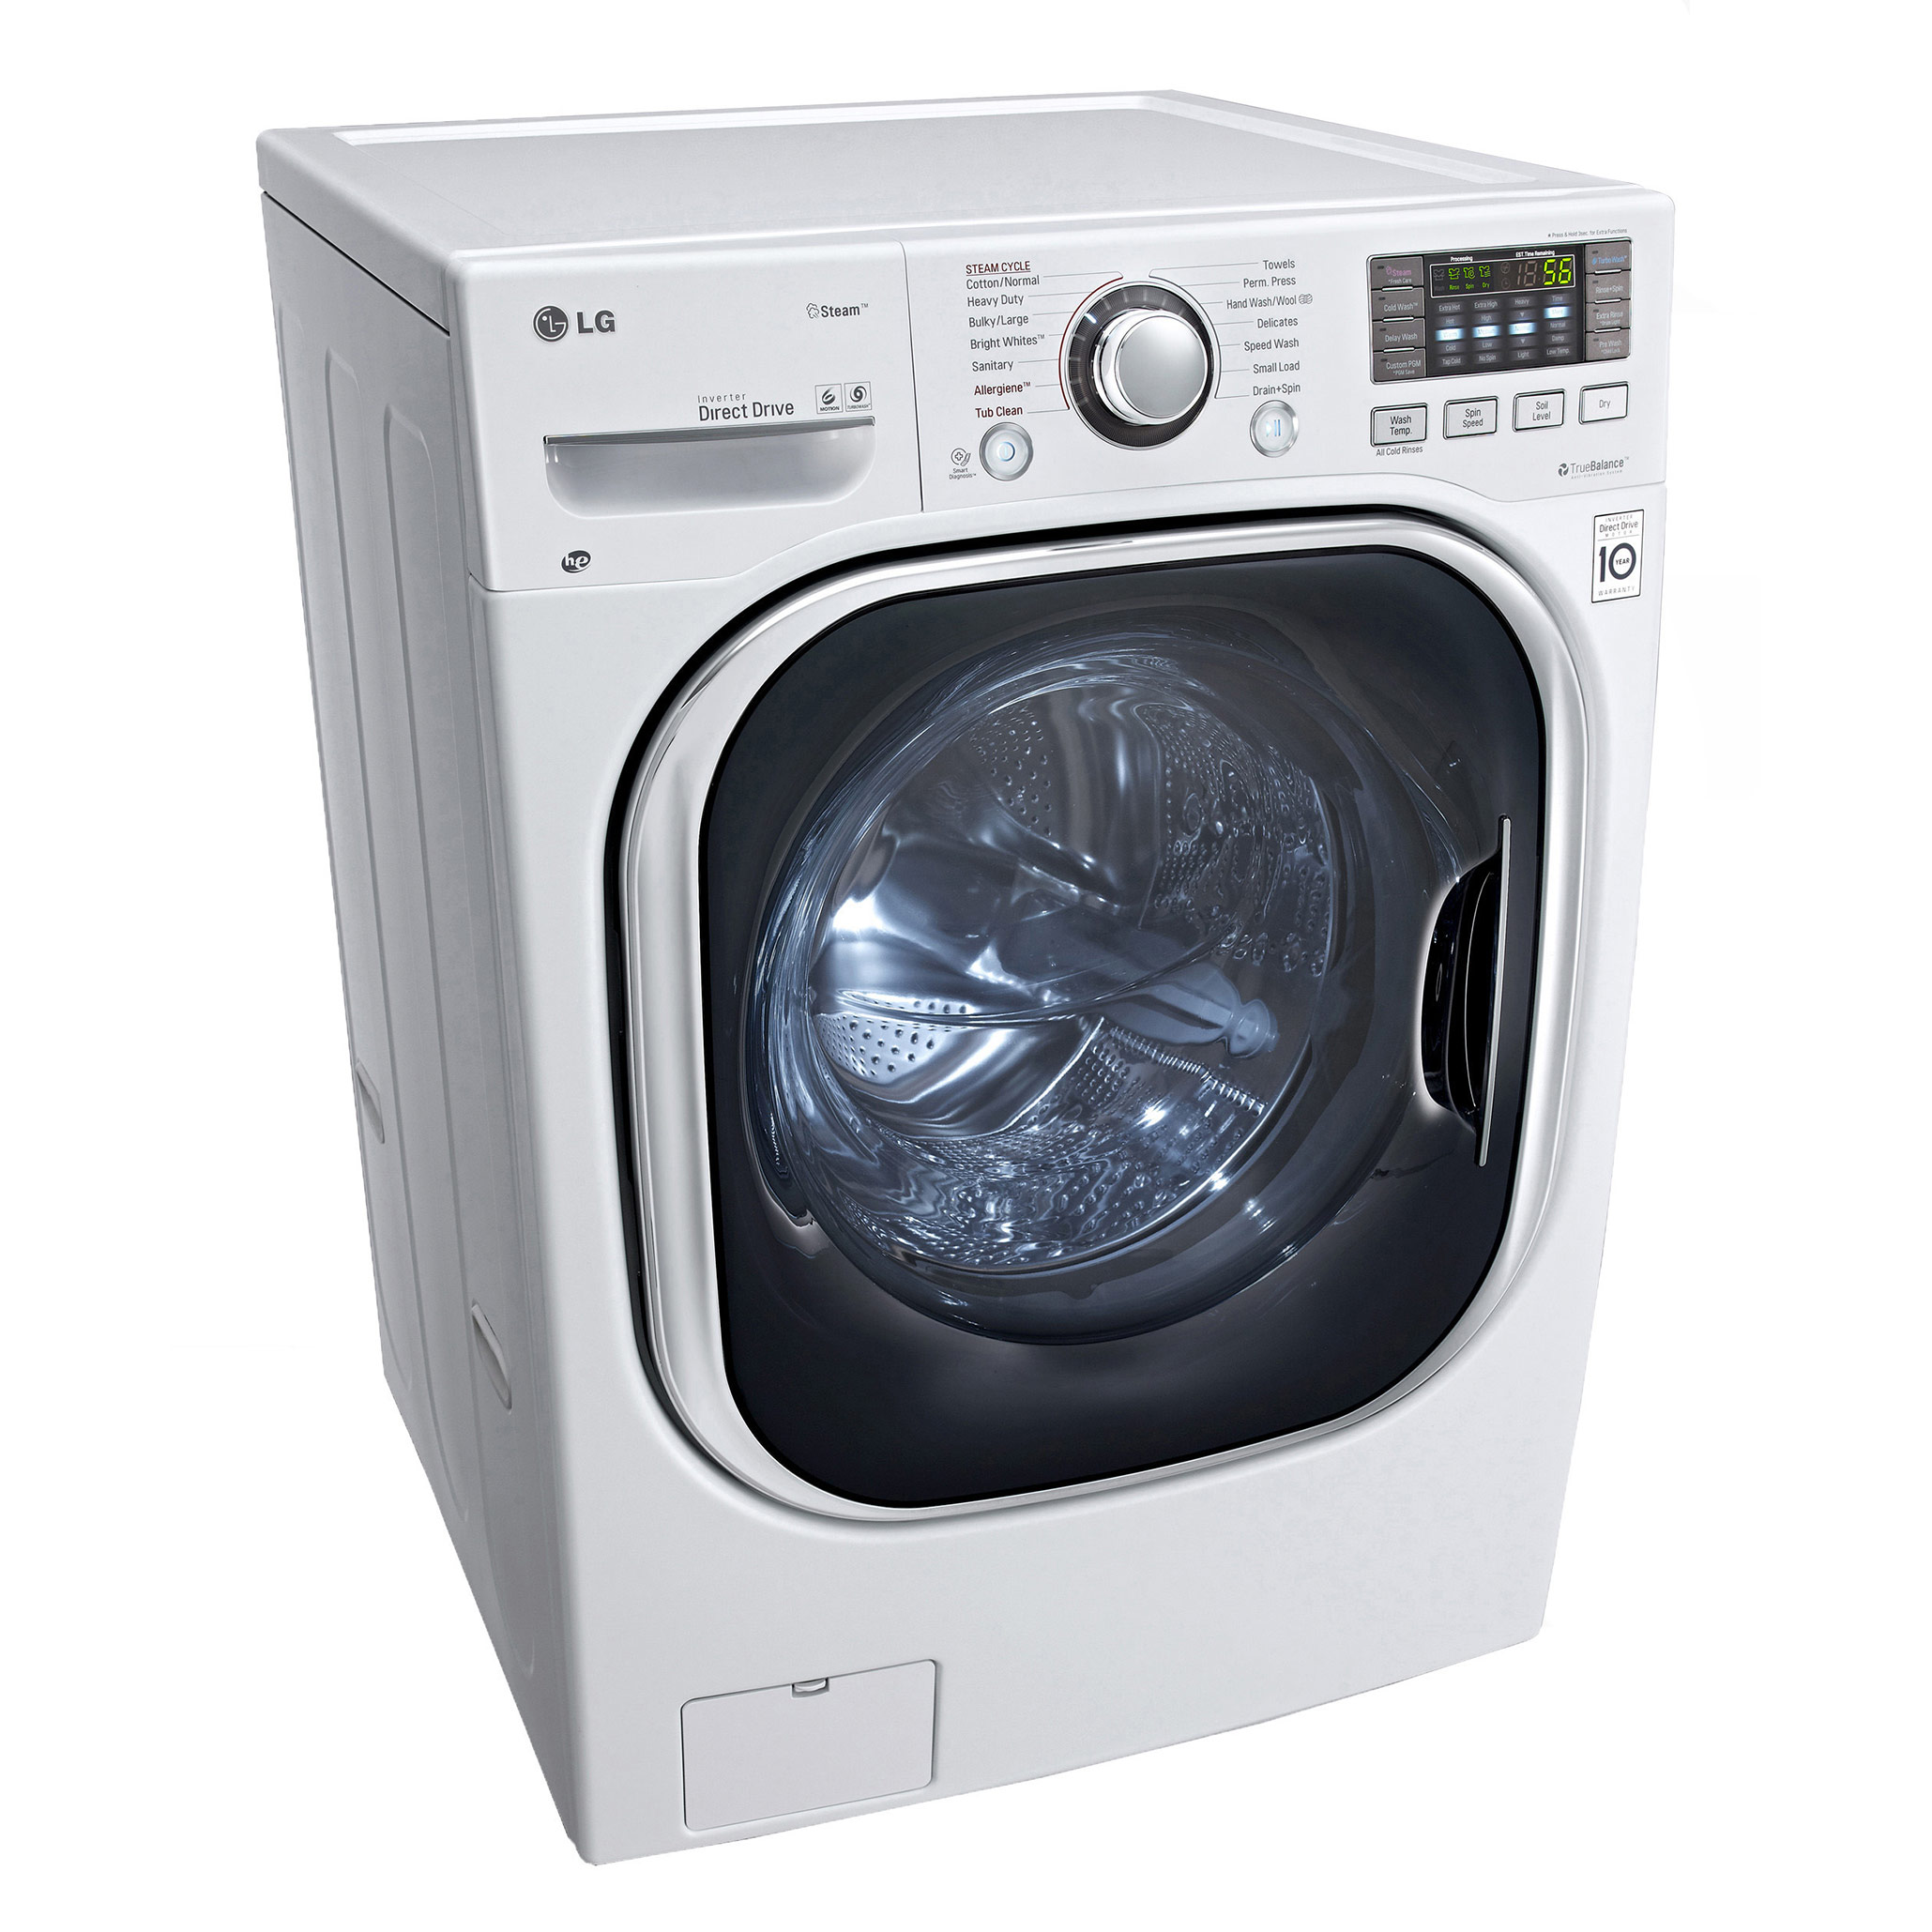 LG WM3997HWA | All in One Washer Dryer Combo | LGWasherDryer.com Best Portable Washer Dryer Combo For Apartments Ventless